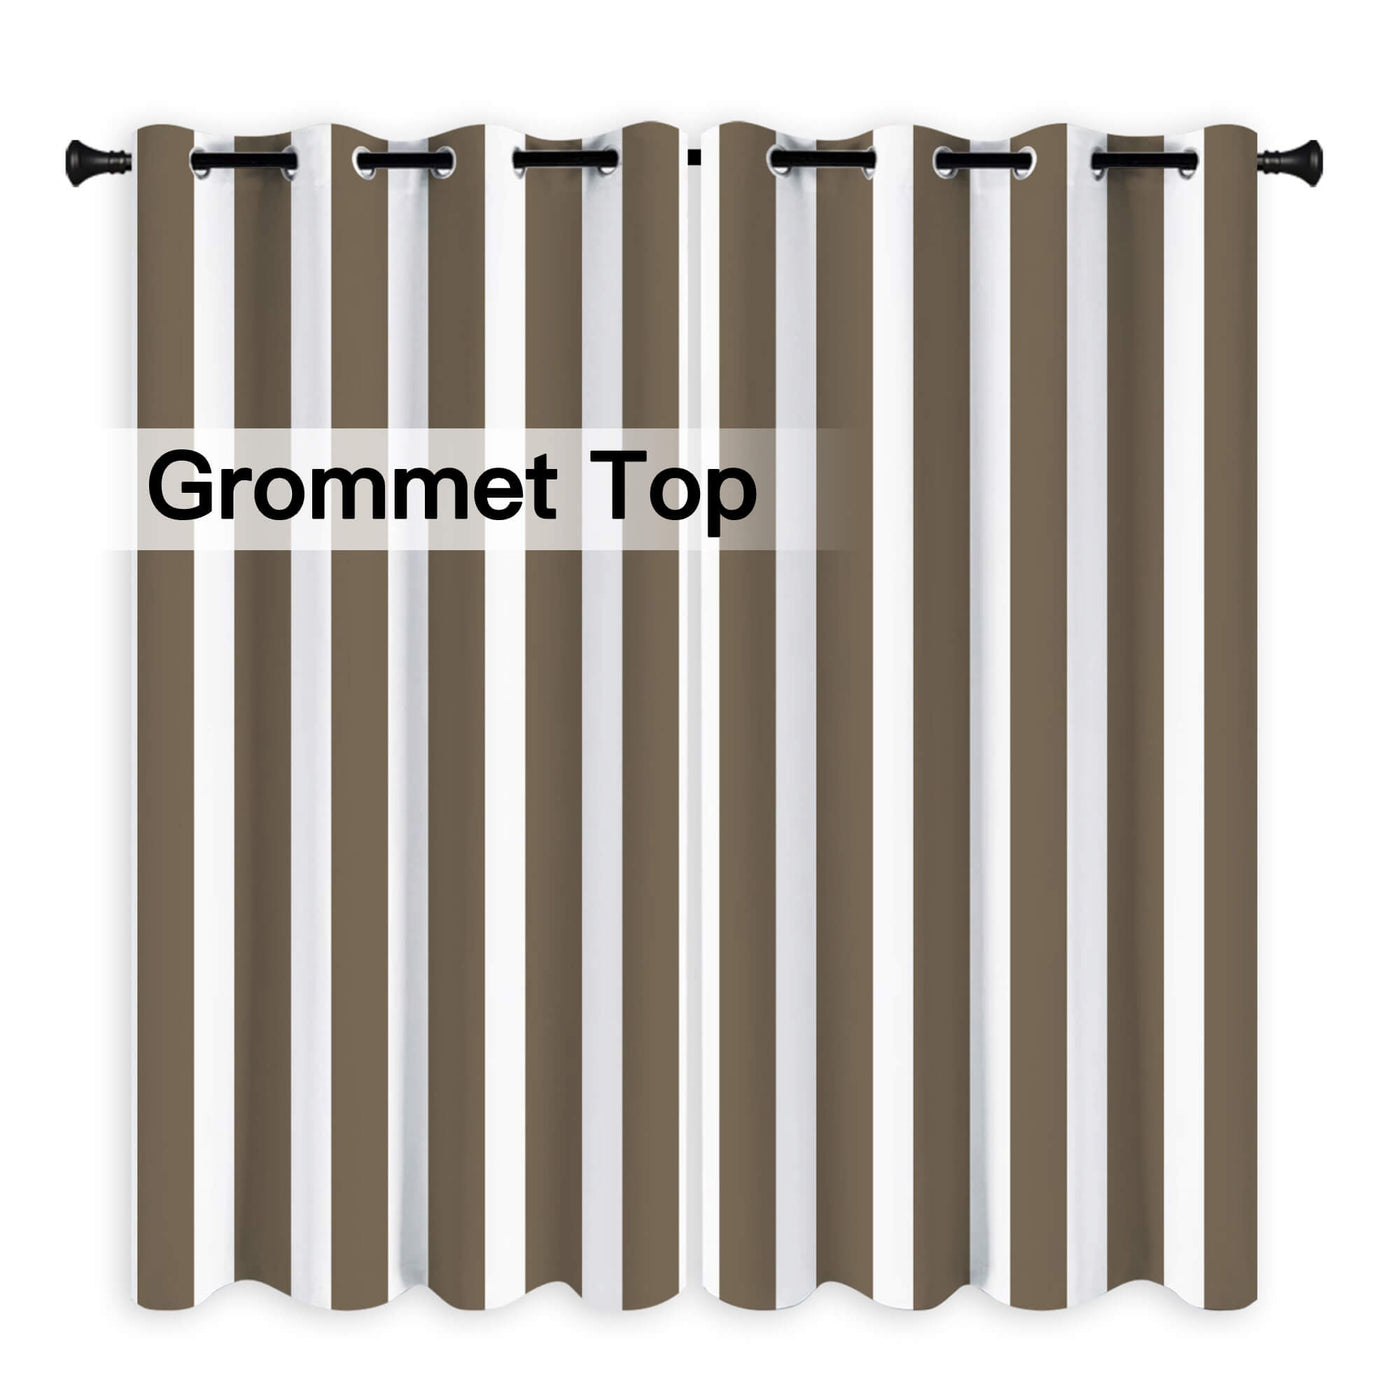 Heartcosy Brown Stripe Curtains/Drapes 1 Panel | Waterproof Curtains Grommet Top & Bottom | Custom Outdoor Curtains